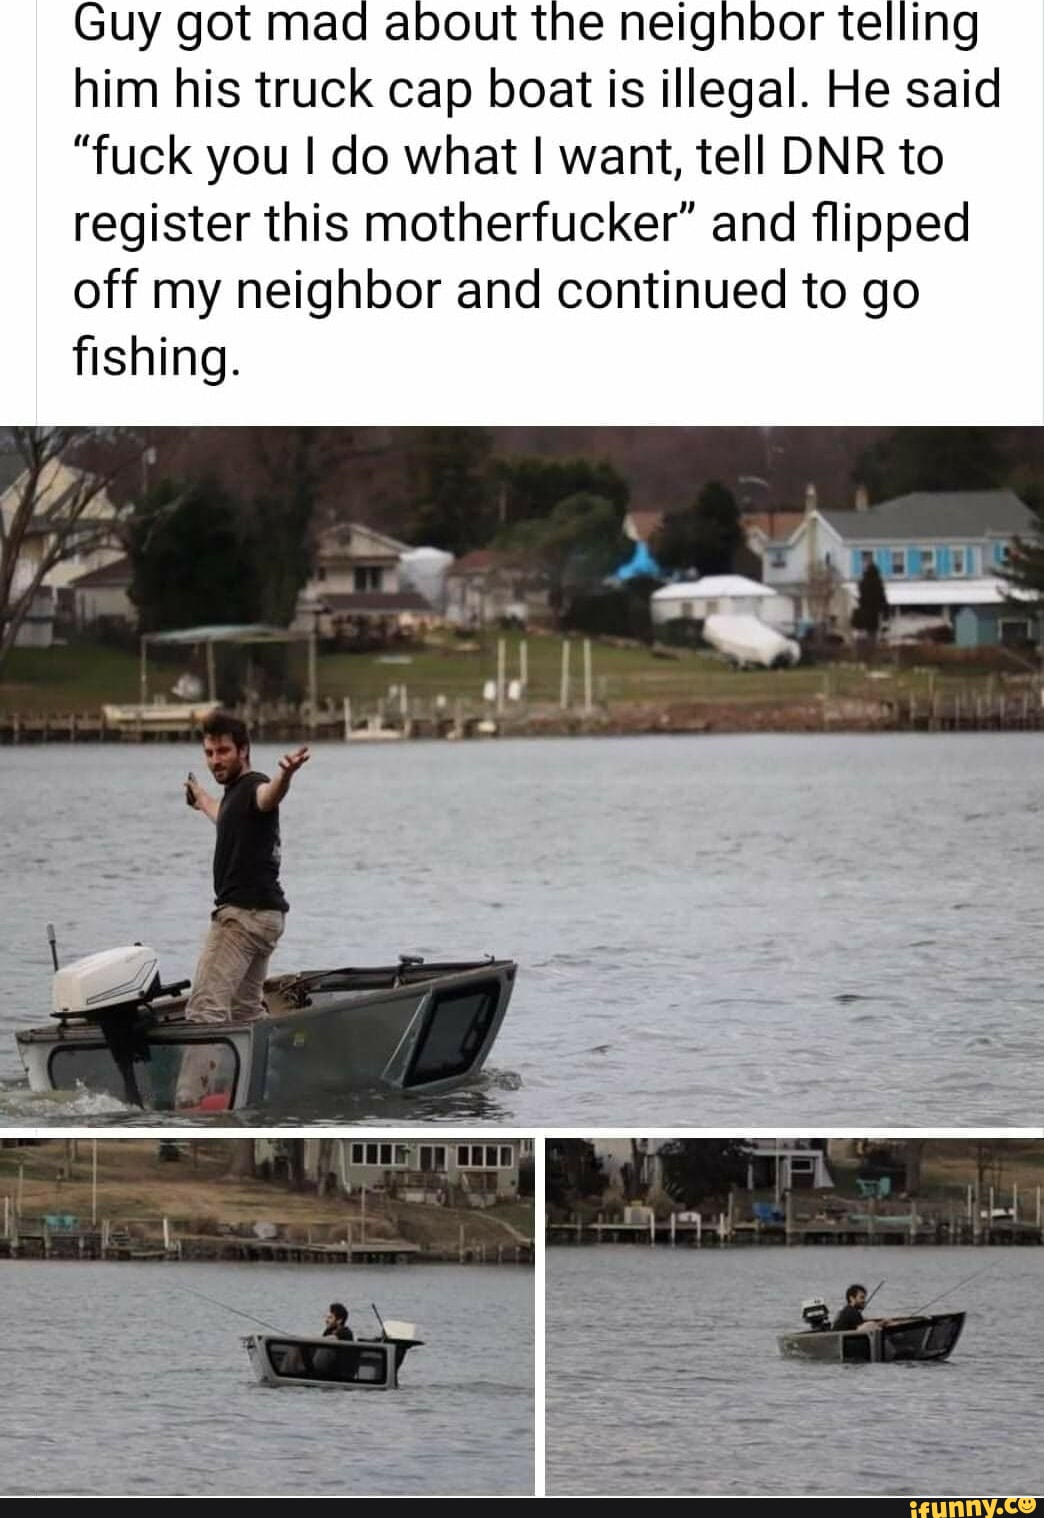 Guy got mad about the neighbor telling him his truck cap boat is